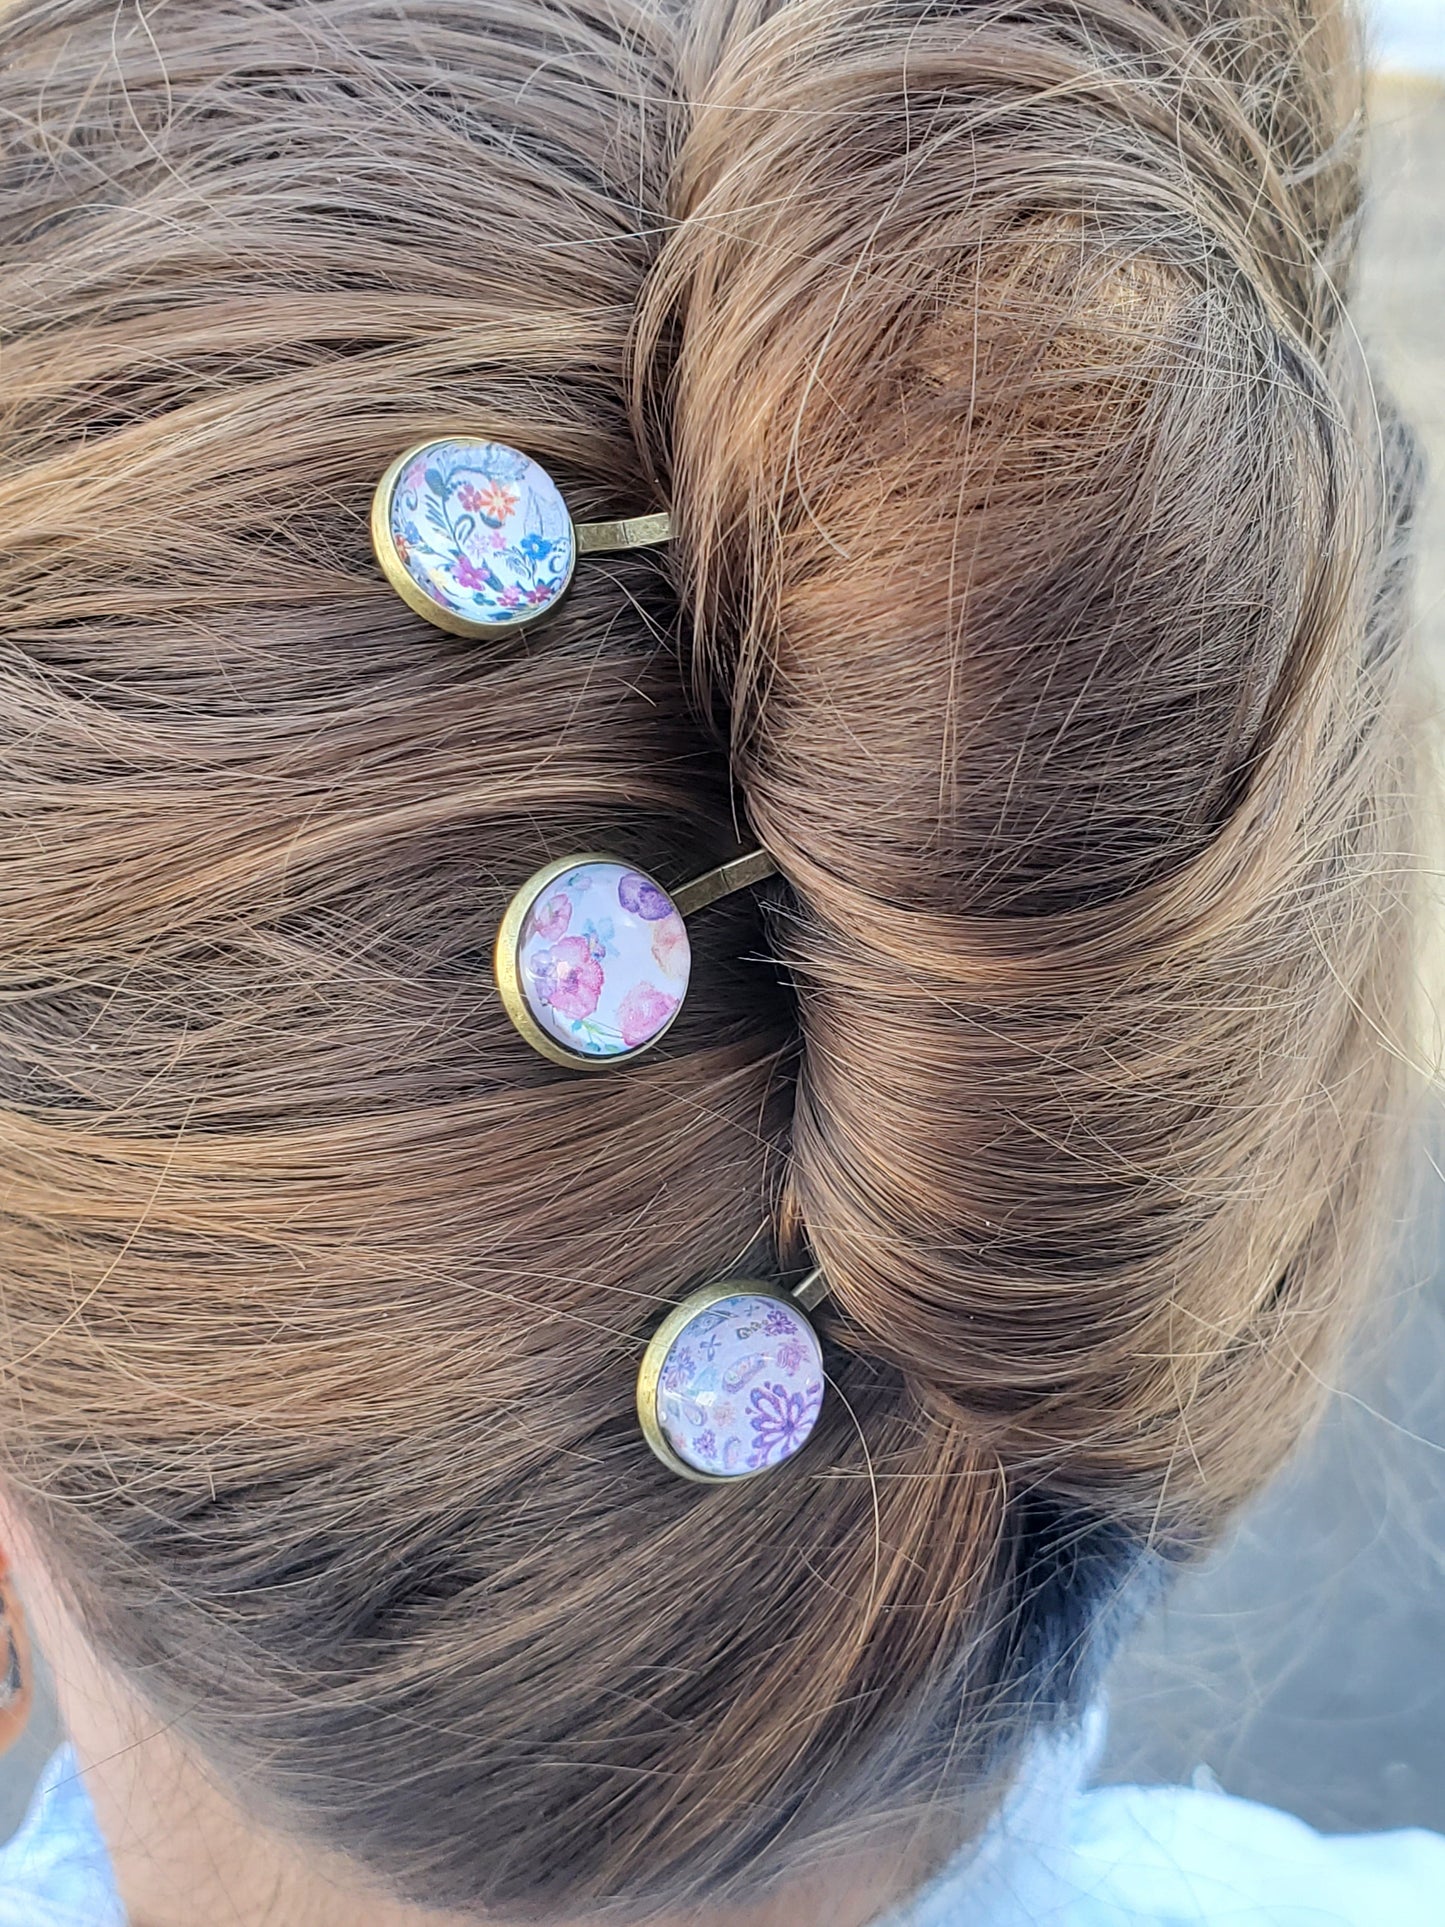 Hair Pins - Floral Color me Happy (Set of 3)